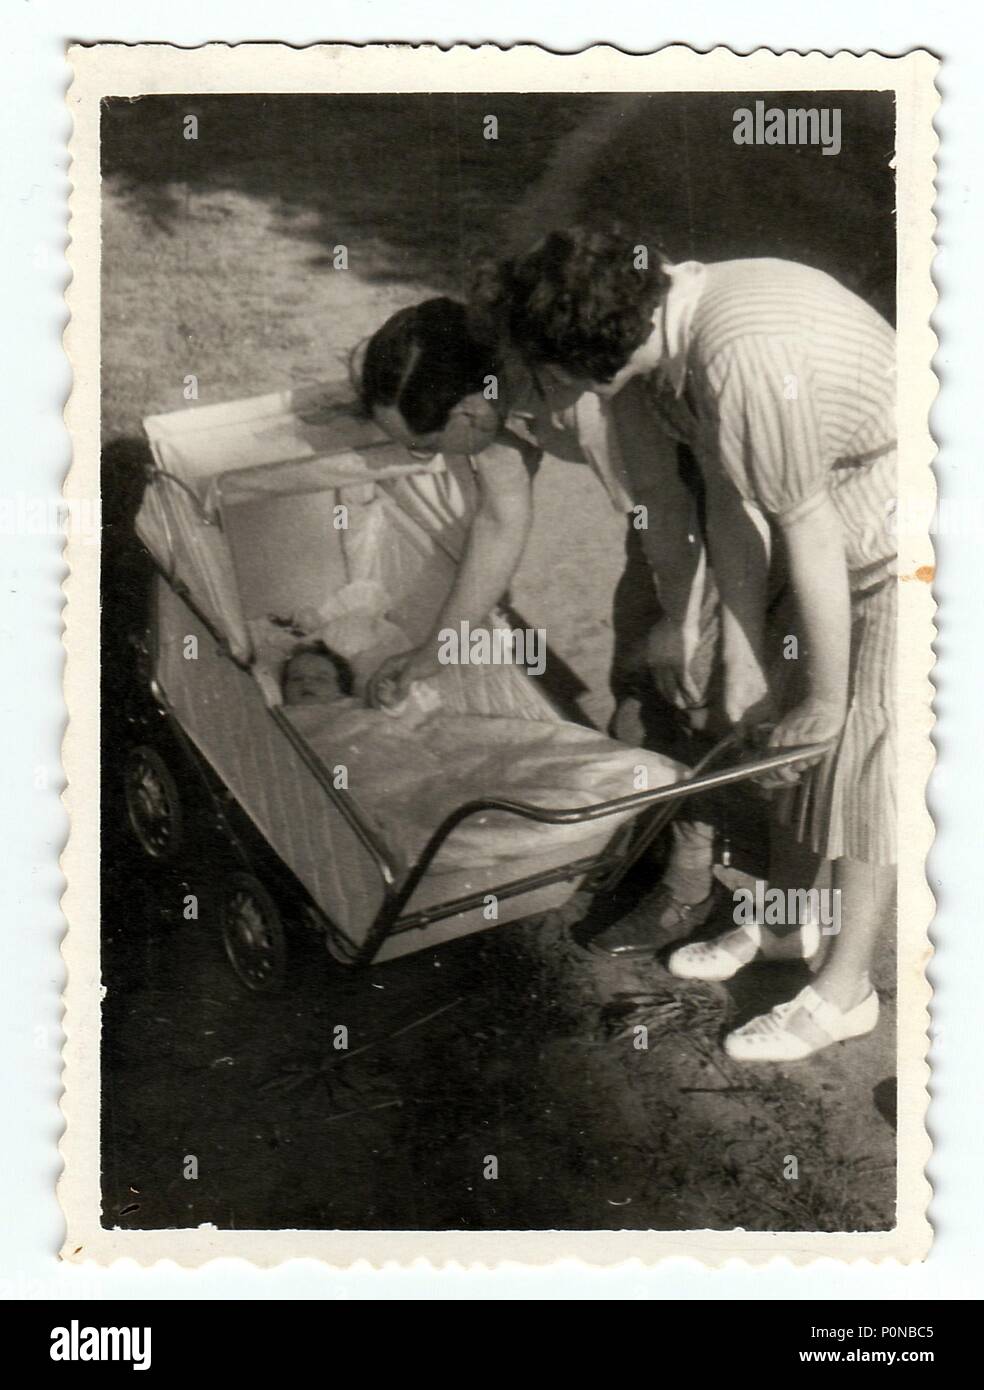 HODONIN, THE CZECHOSLOVAK REPUBLIC, CIRCA 1940: Vintage photo shows baby girl in a pram (baby carriage) with parents, circa 1940. Stock Photo